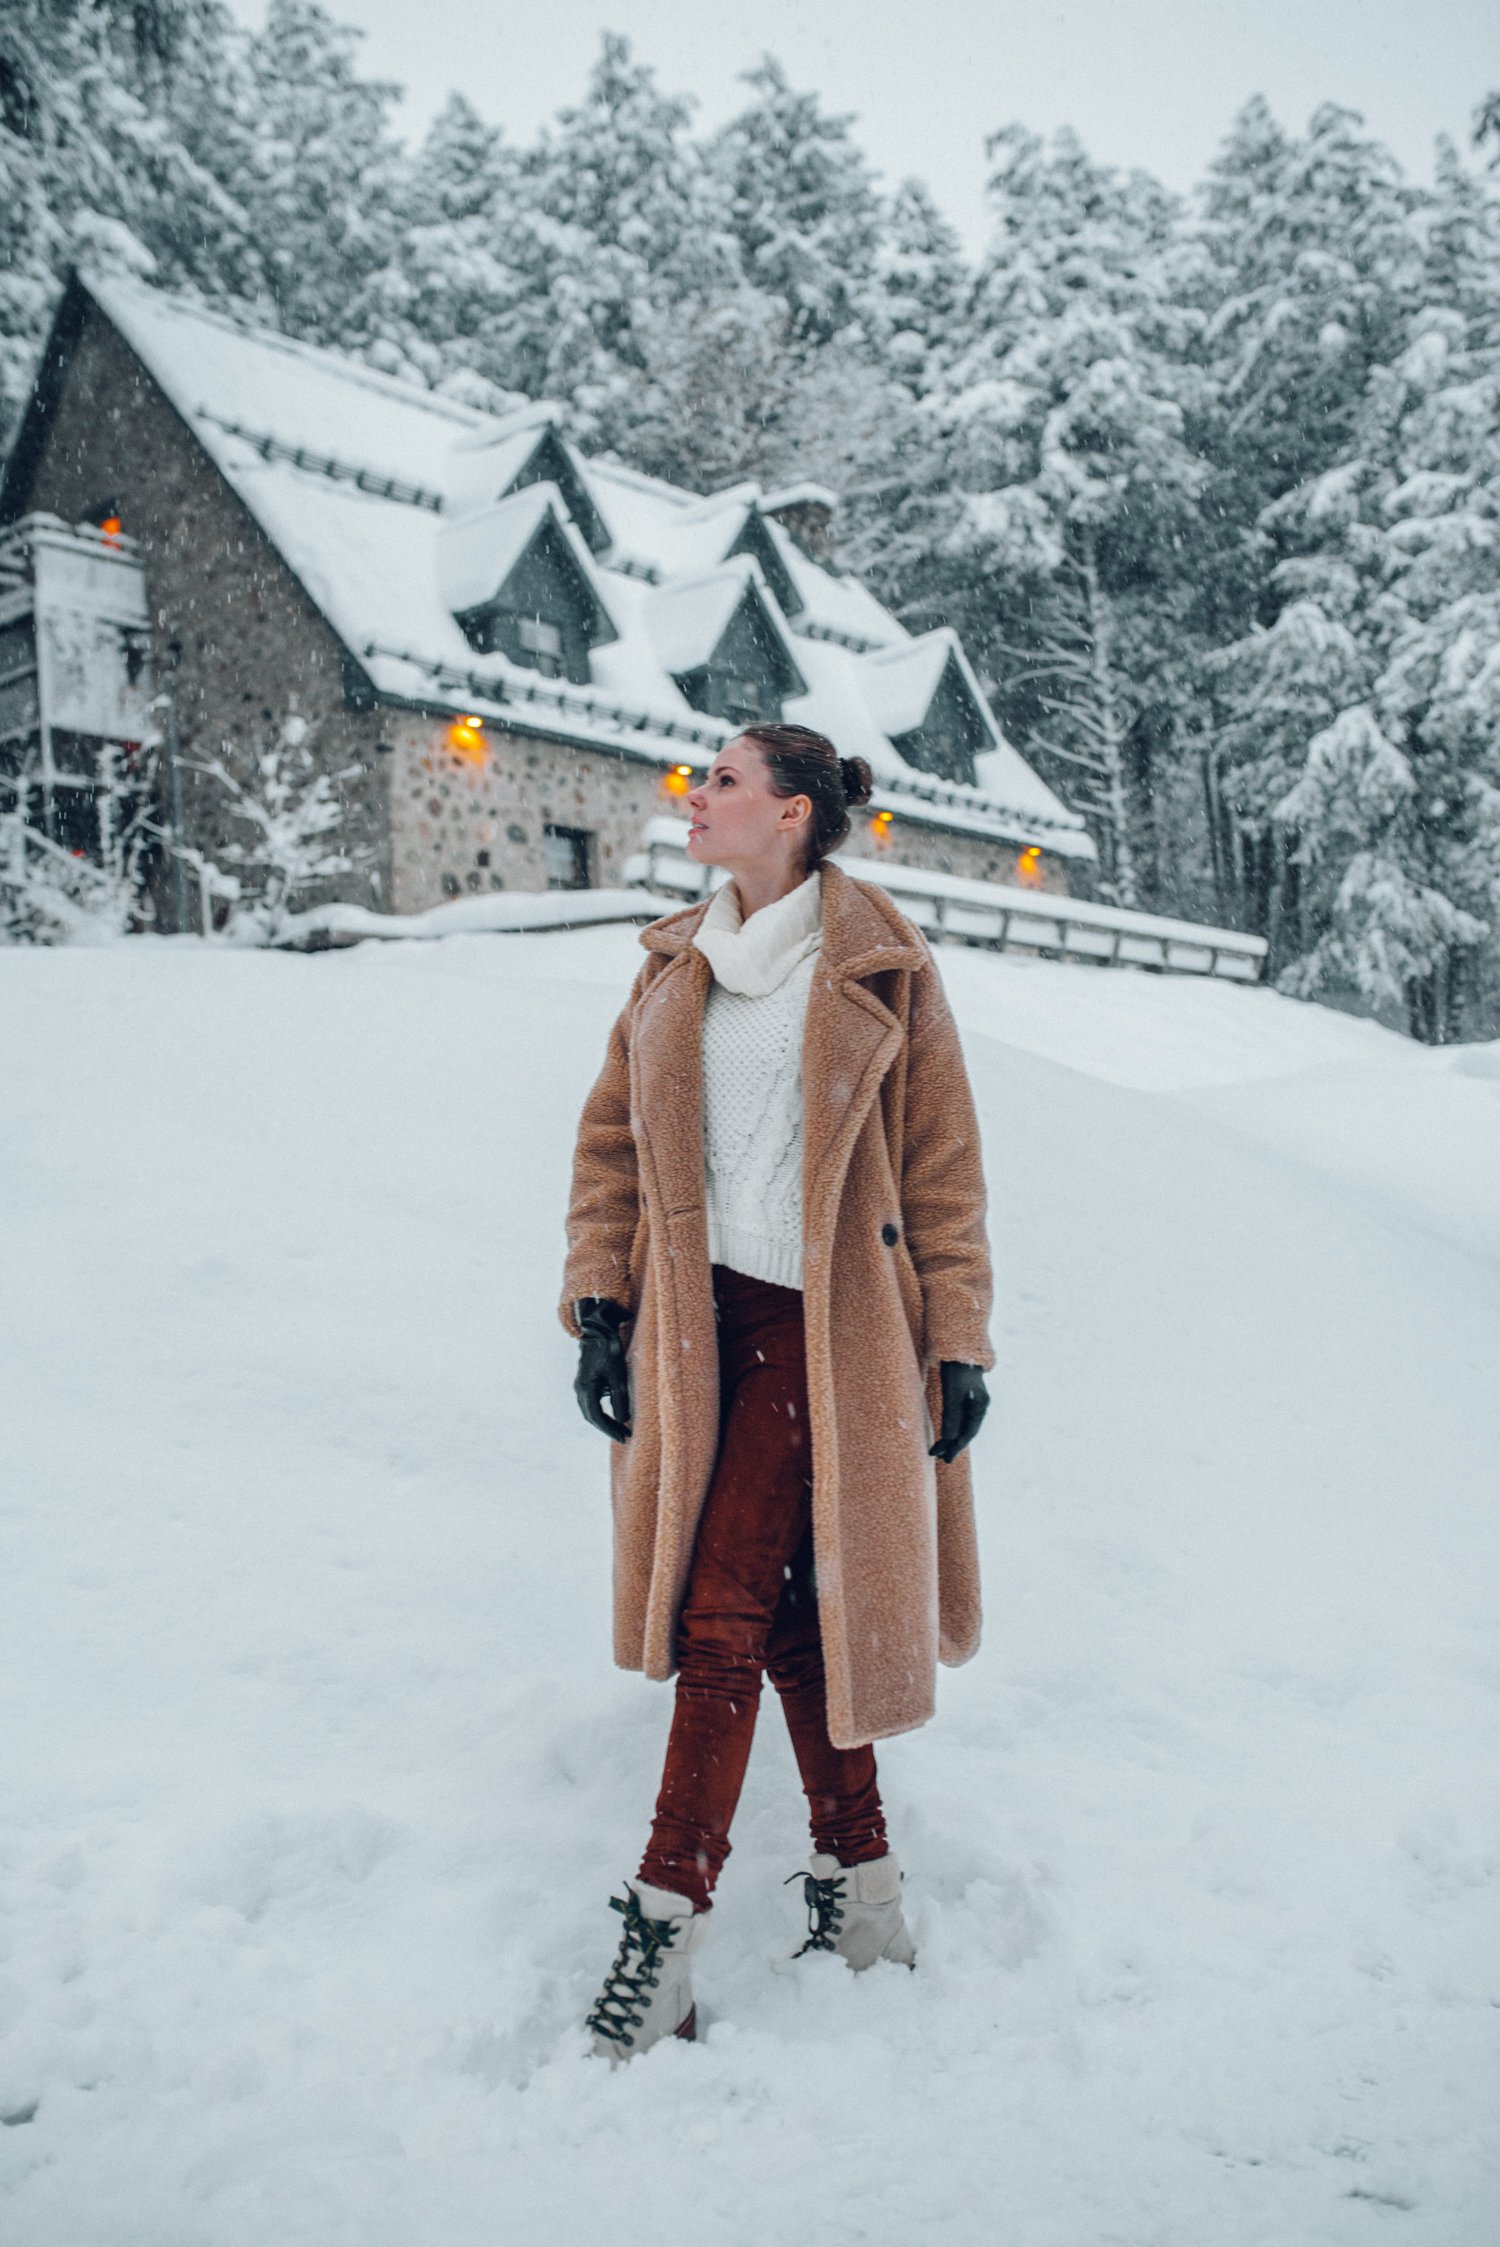 Alyssa Campanella of The A List blog visits Balnea Spa in Québec wearing Storets teddy coat, Joseph suede pants, and Frye Samantha hiker boots